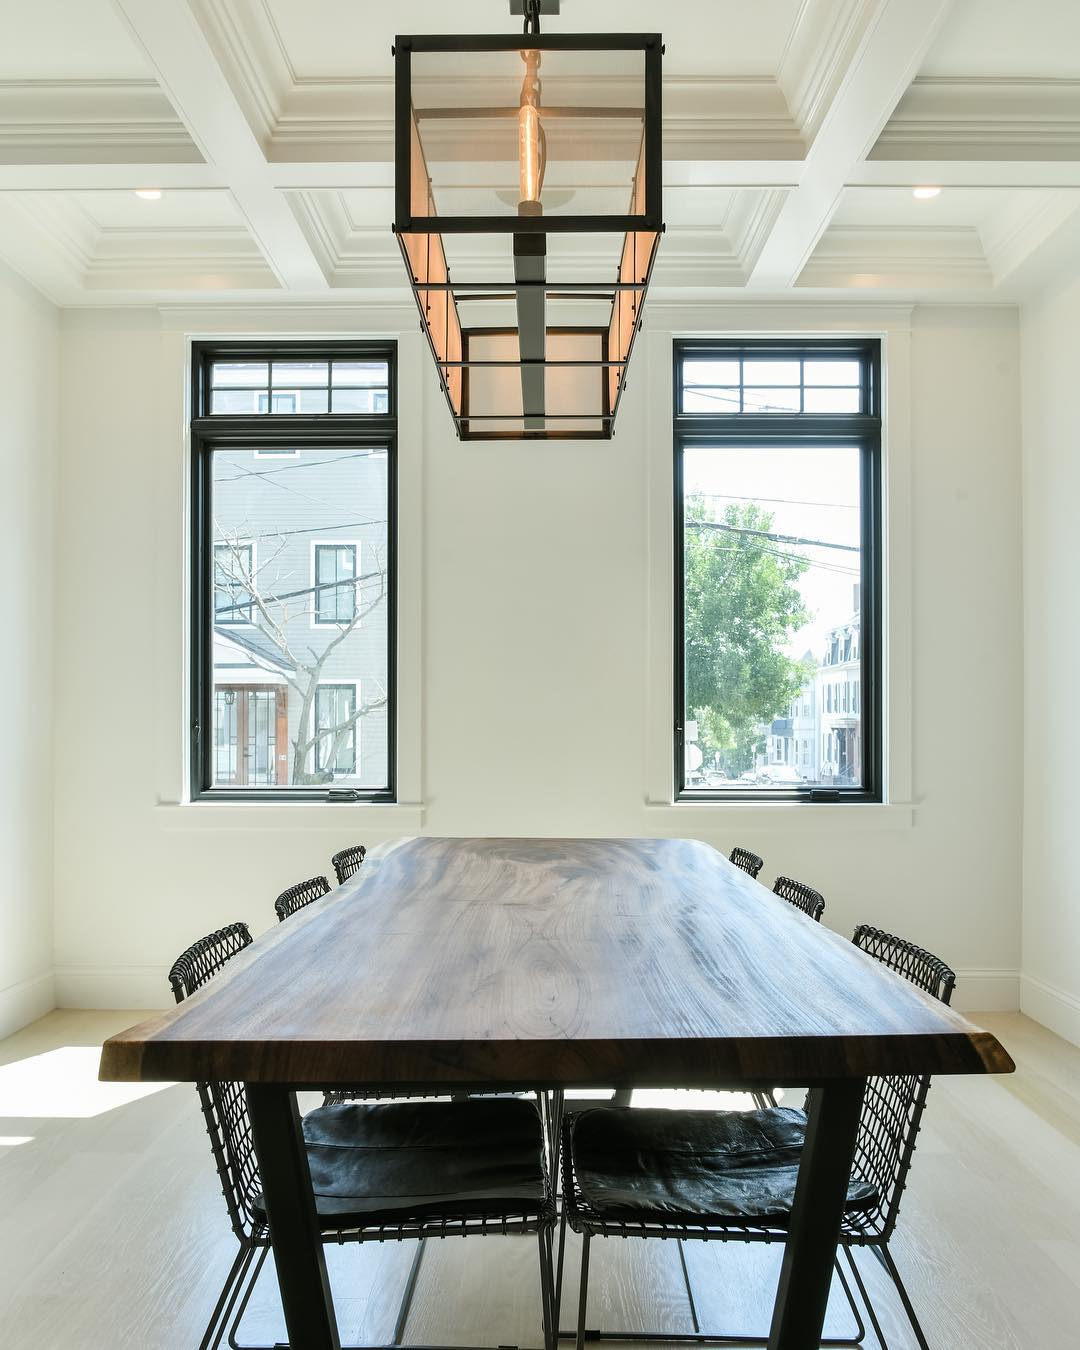 Contemporary dining room brightened by two casement windows with small fixed windows overhead